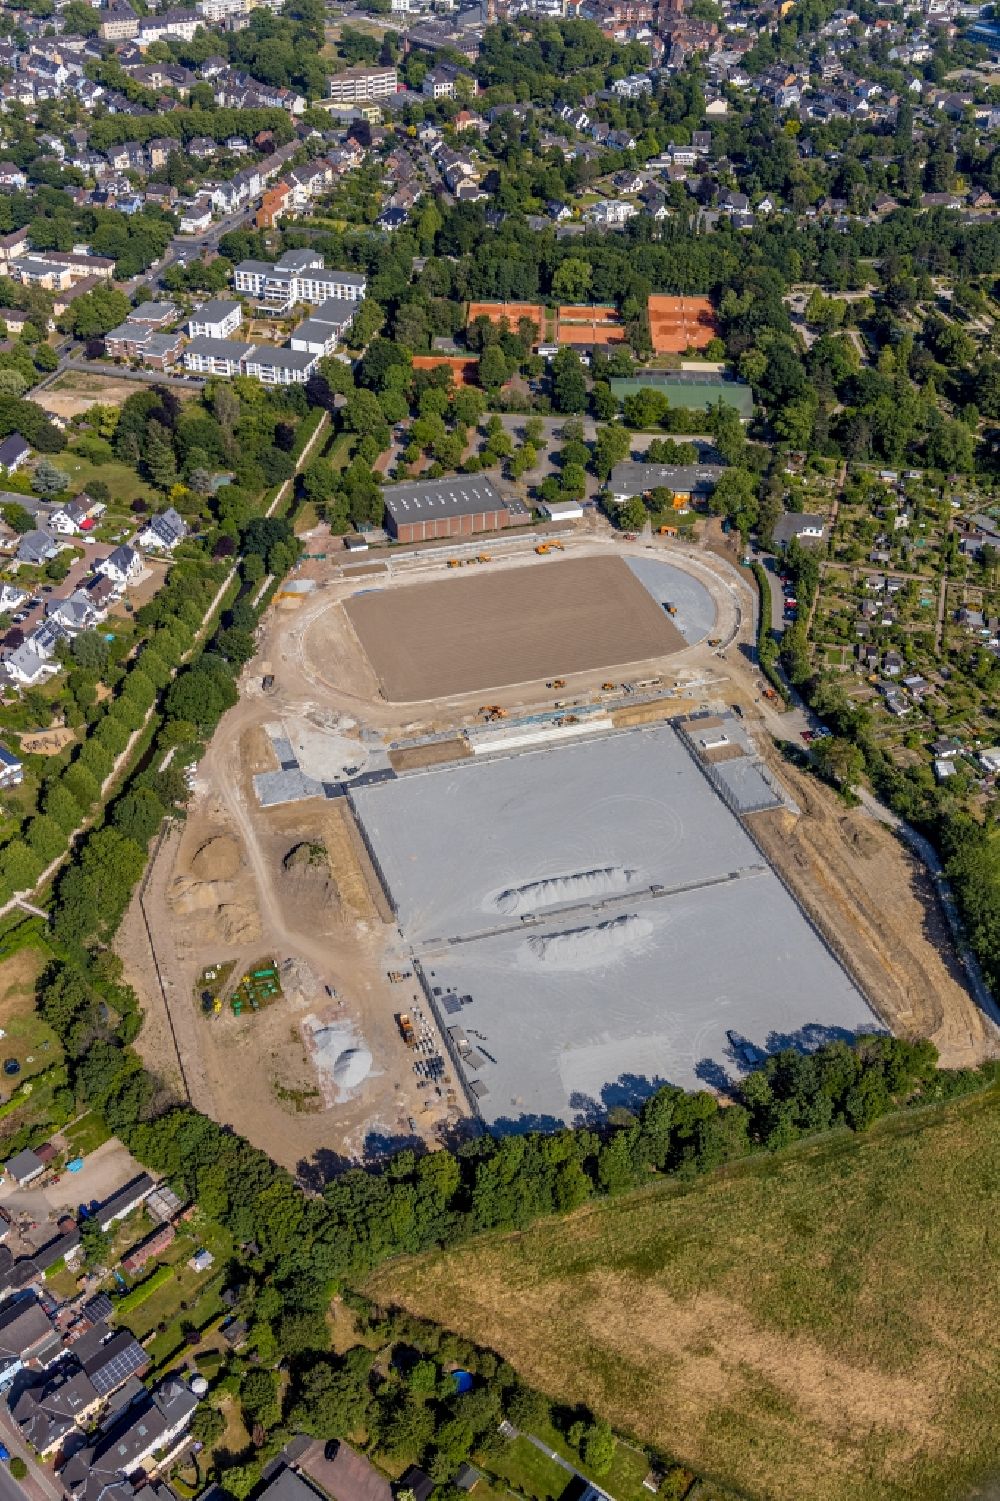 Aerial image Dinslaken - Construction site ensemble of sports grounds in Dinslaken in the state North Rhine-Westphalia